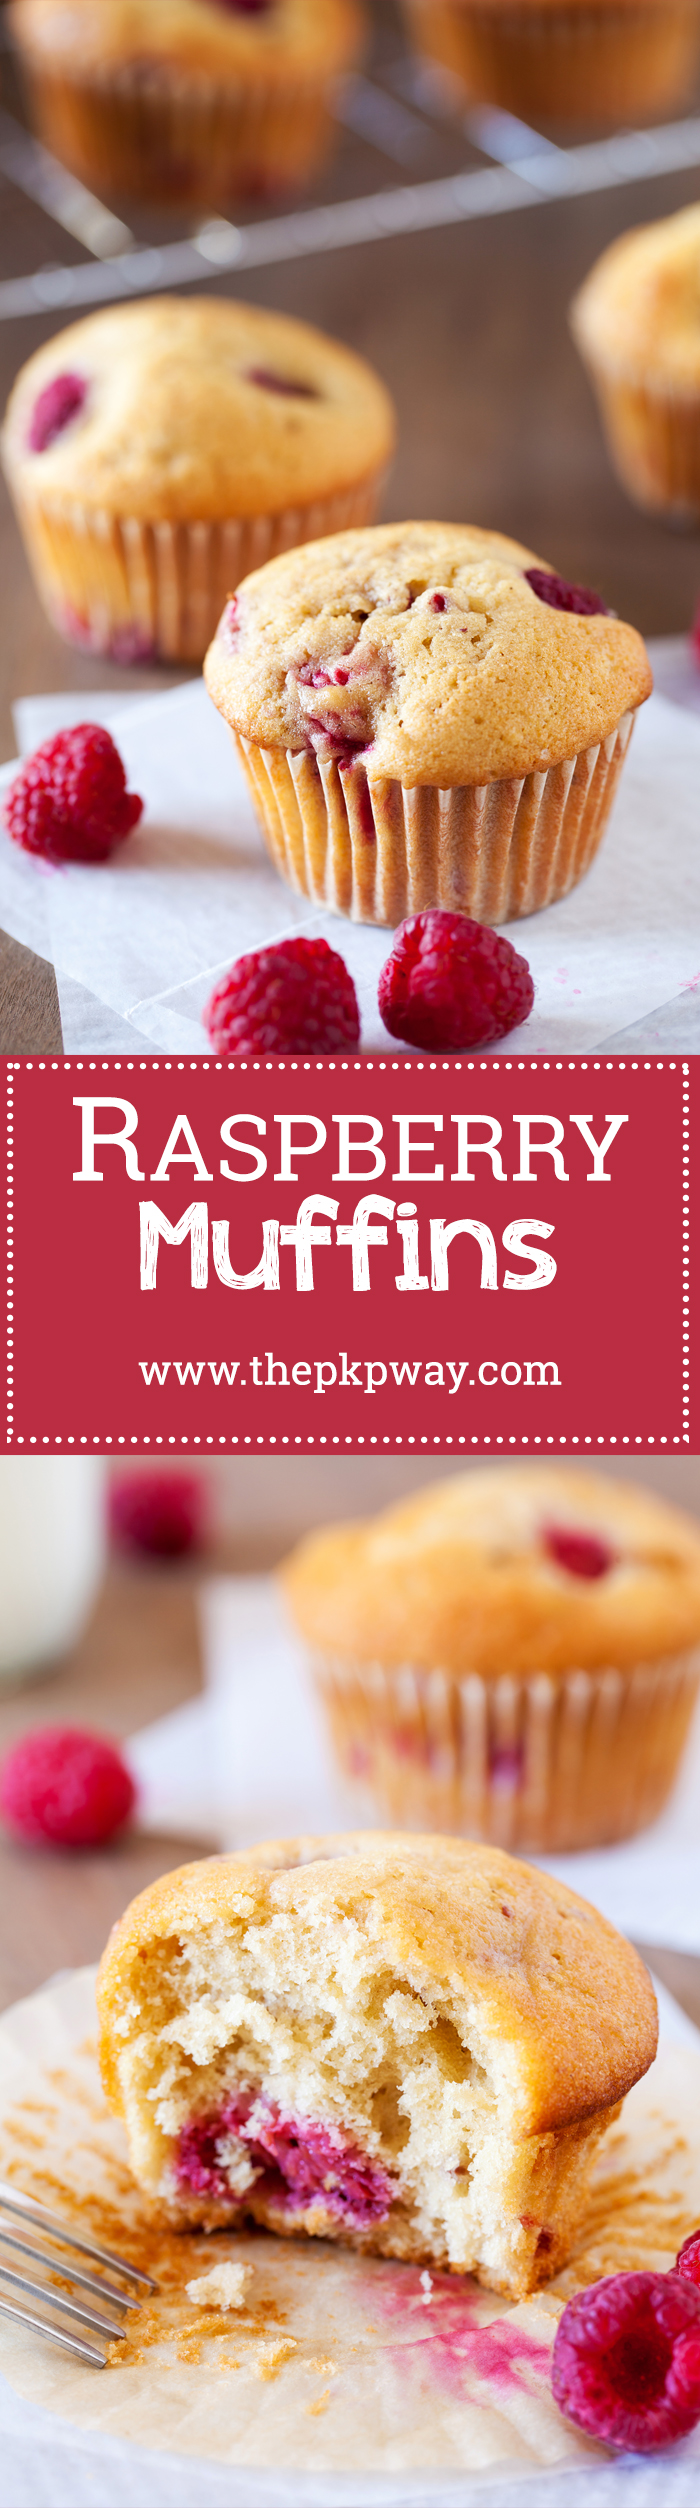 Game-changing raspberry muffins. These raspberry muffins have a special ingredient that amplifies the raspberry flavor and intensifies the sweet muffin aroma. 